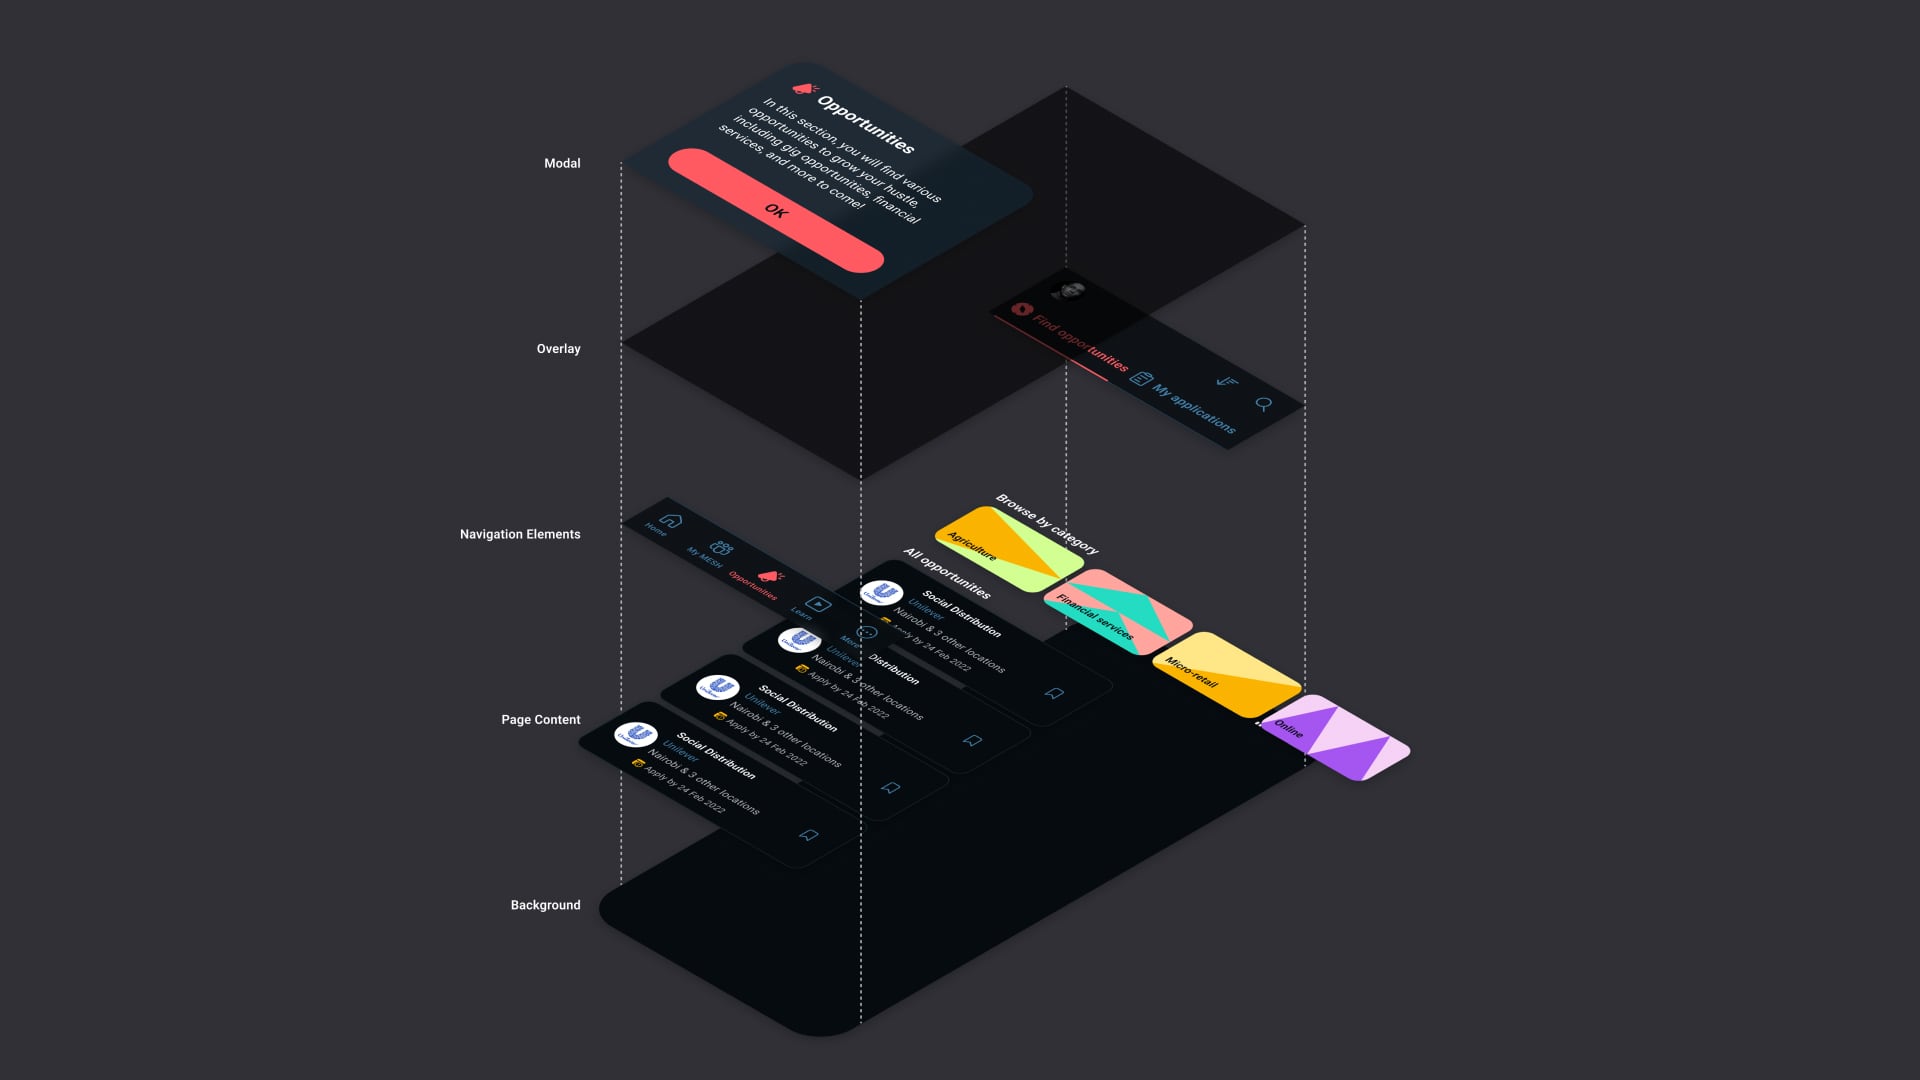 An isometric exploded view of the app's layer hierarchy -- a modal sheet on top with a dark overlay underneath; then navigation elements below; the page content; and finally the app background at the very bottom.